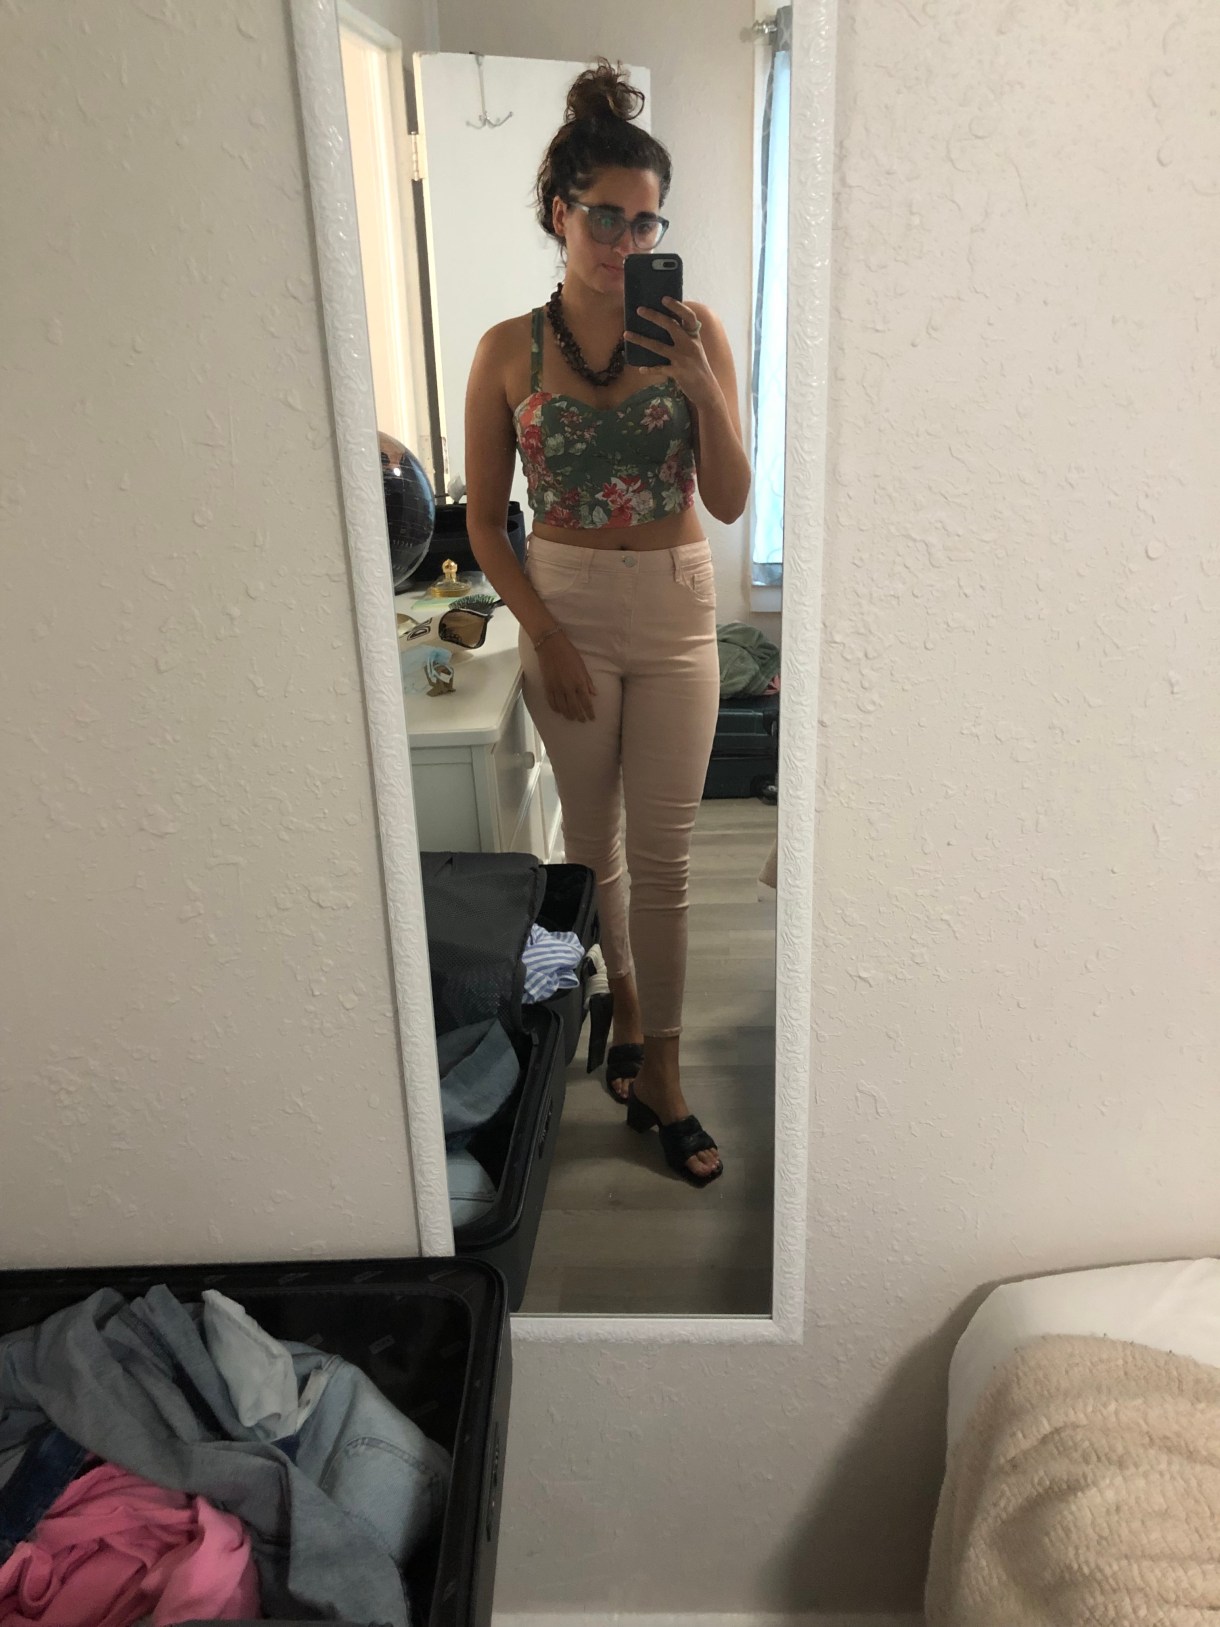 Kayla Kumari Upadhyaya has her hair in a bun and is wearing a floral bustier crop top, light pink pants, black heeled mules, and a brown chunky wooden necklace. She is taking a mirror selfie in an Airbnb bedroom.